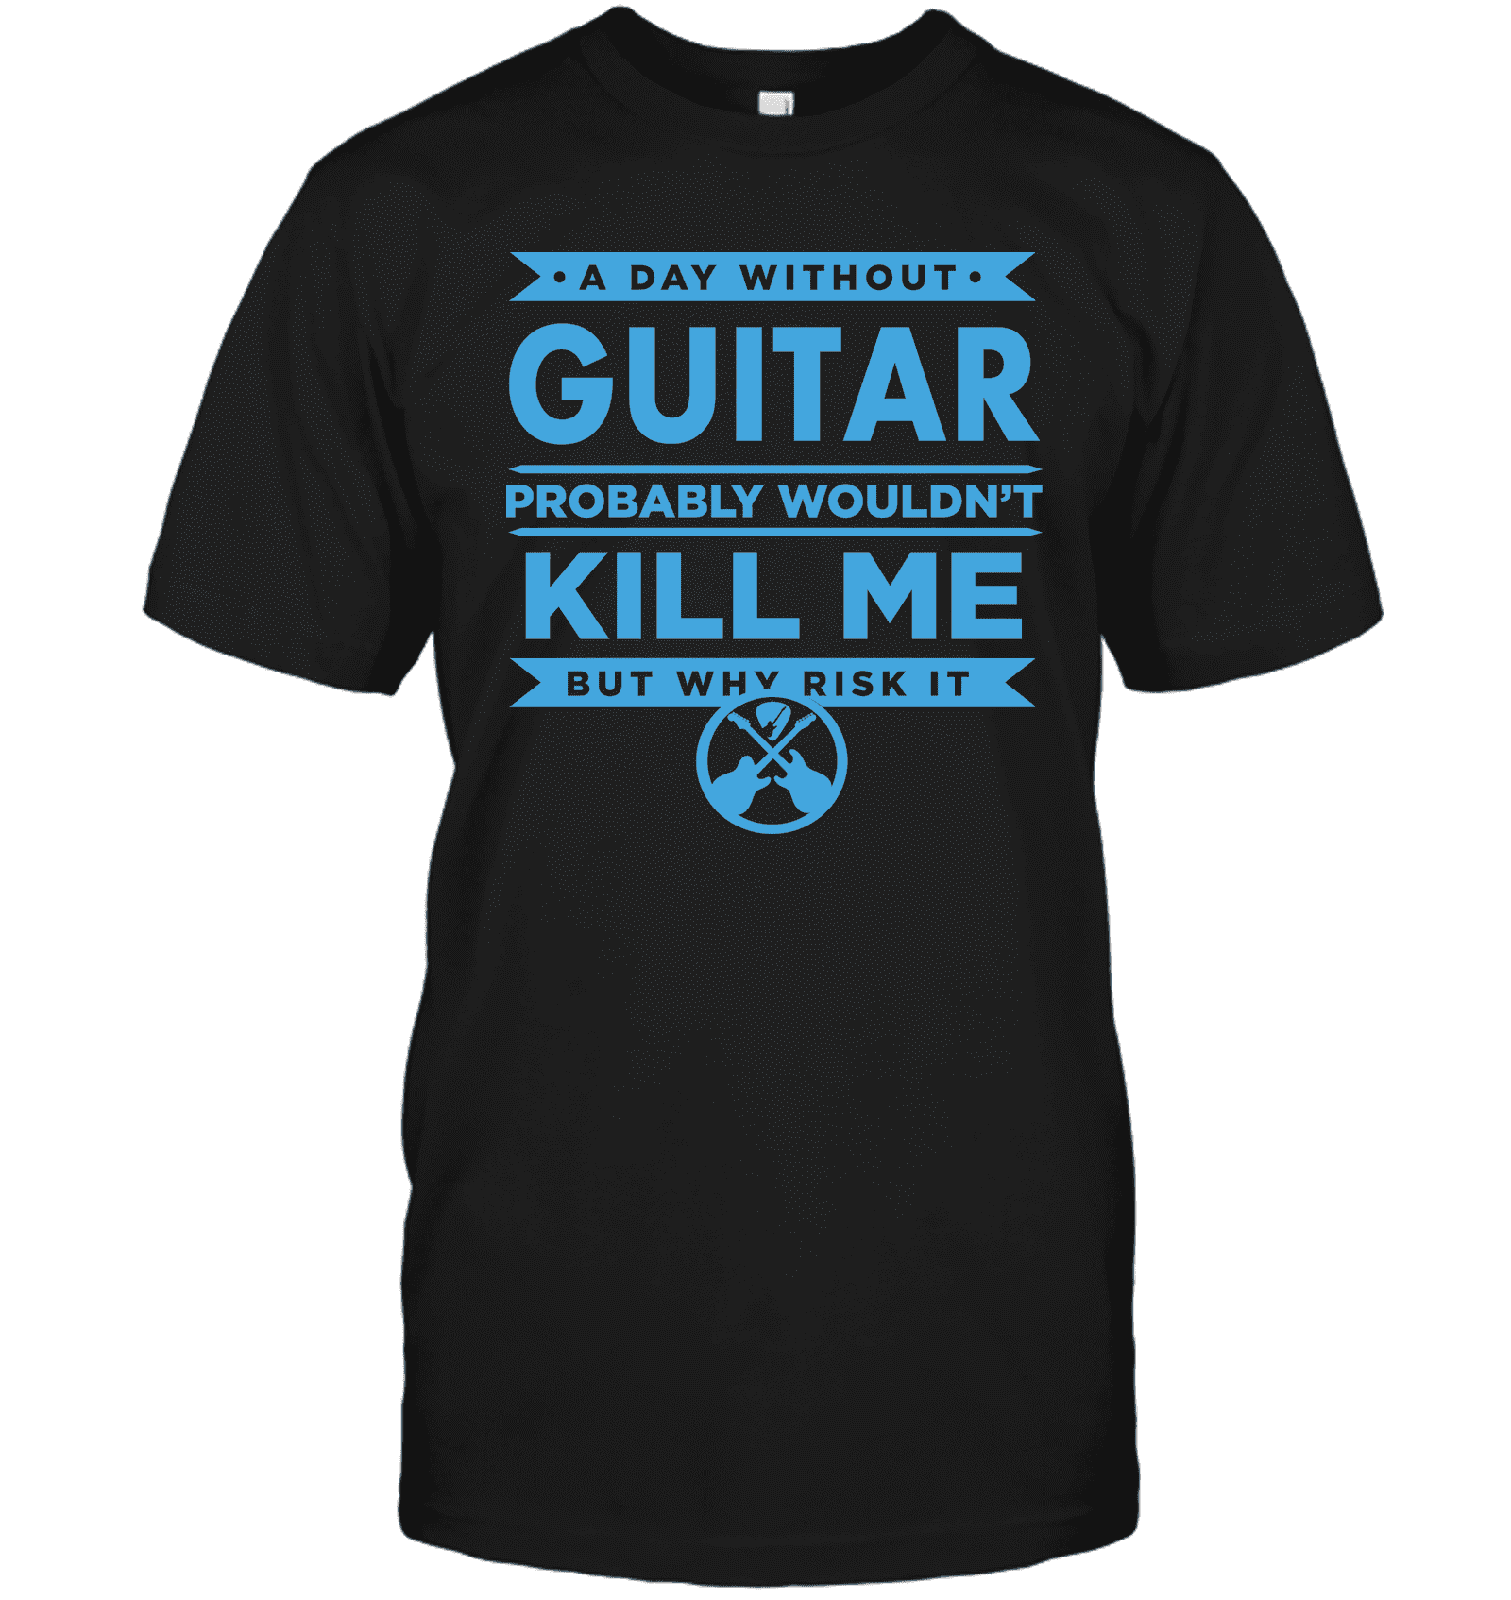 Axe Dr. "A Day Without Guitar" Funny Guitar T-Shirt shop.AxeDr.com AxeDr., AxeDr. Guitar Tees & Hoodies, Brand New, Custom Product, Funny, Gifts for Guitarists, Guitar